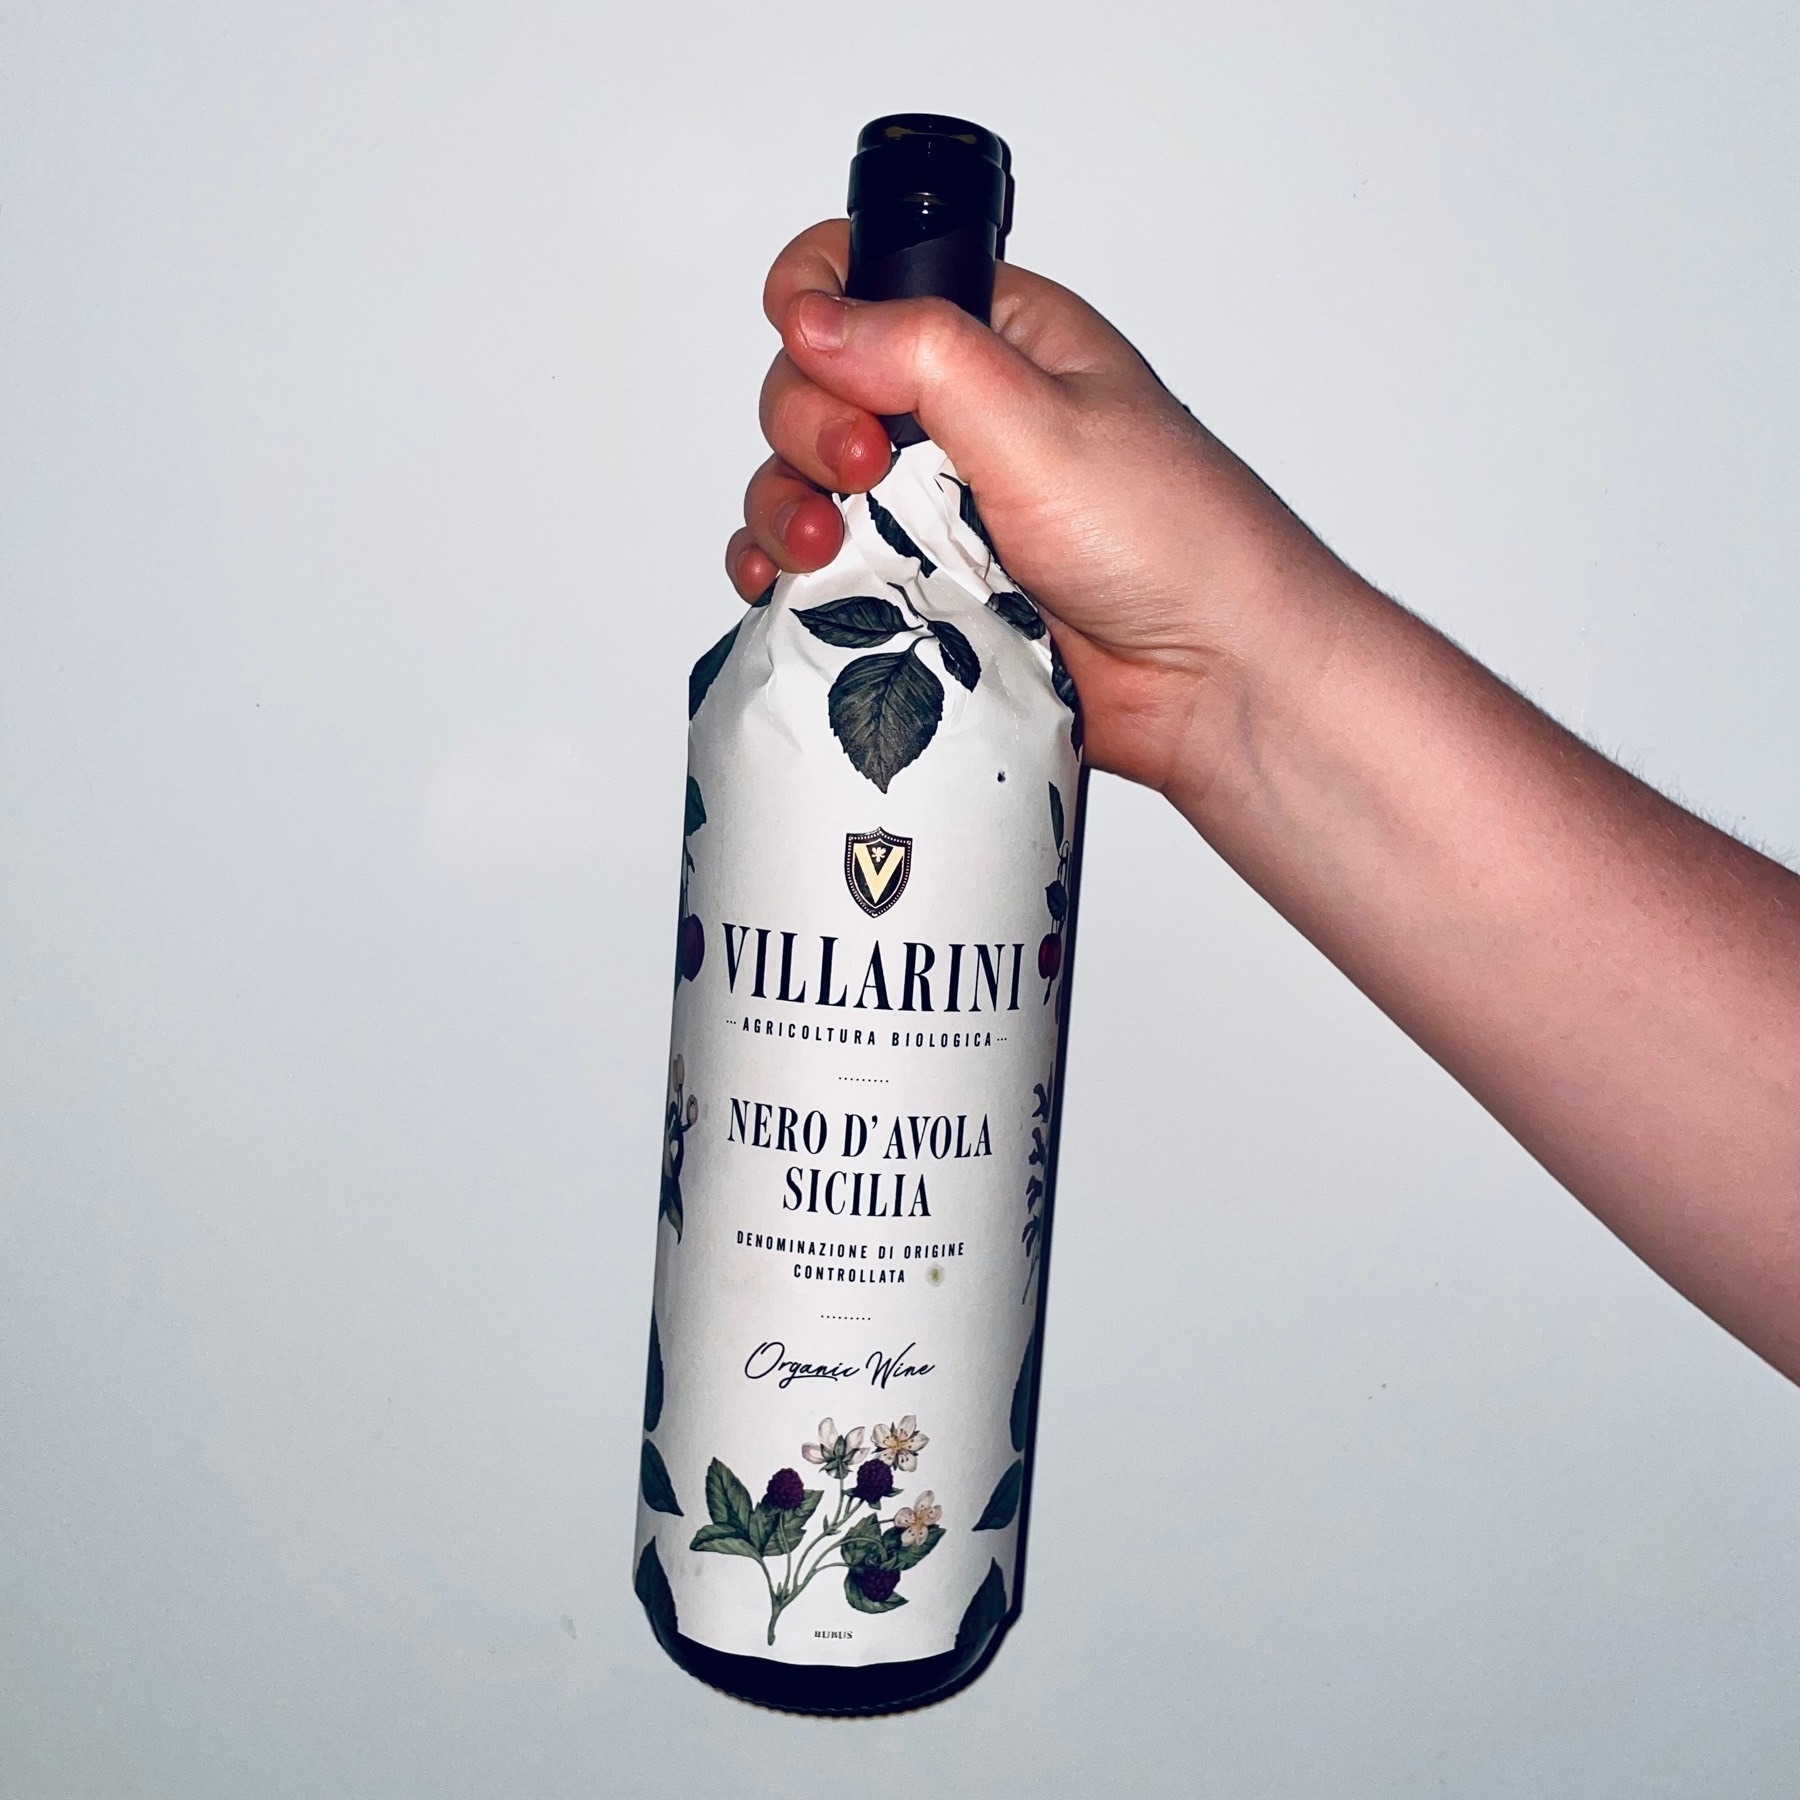 A hand holding an opened wine bottle. It's totally wrapped in paper, lovingly illustrated with leaves, that also act as the bottle's label. The label reads Villarini Nero d’Avola Sicilia, organic wine.